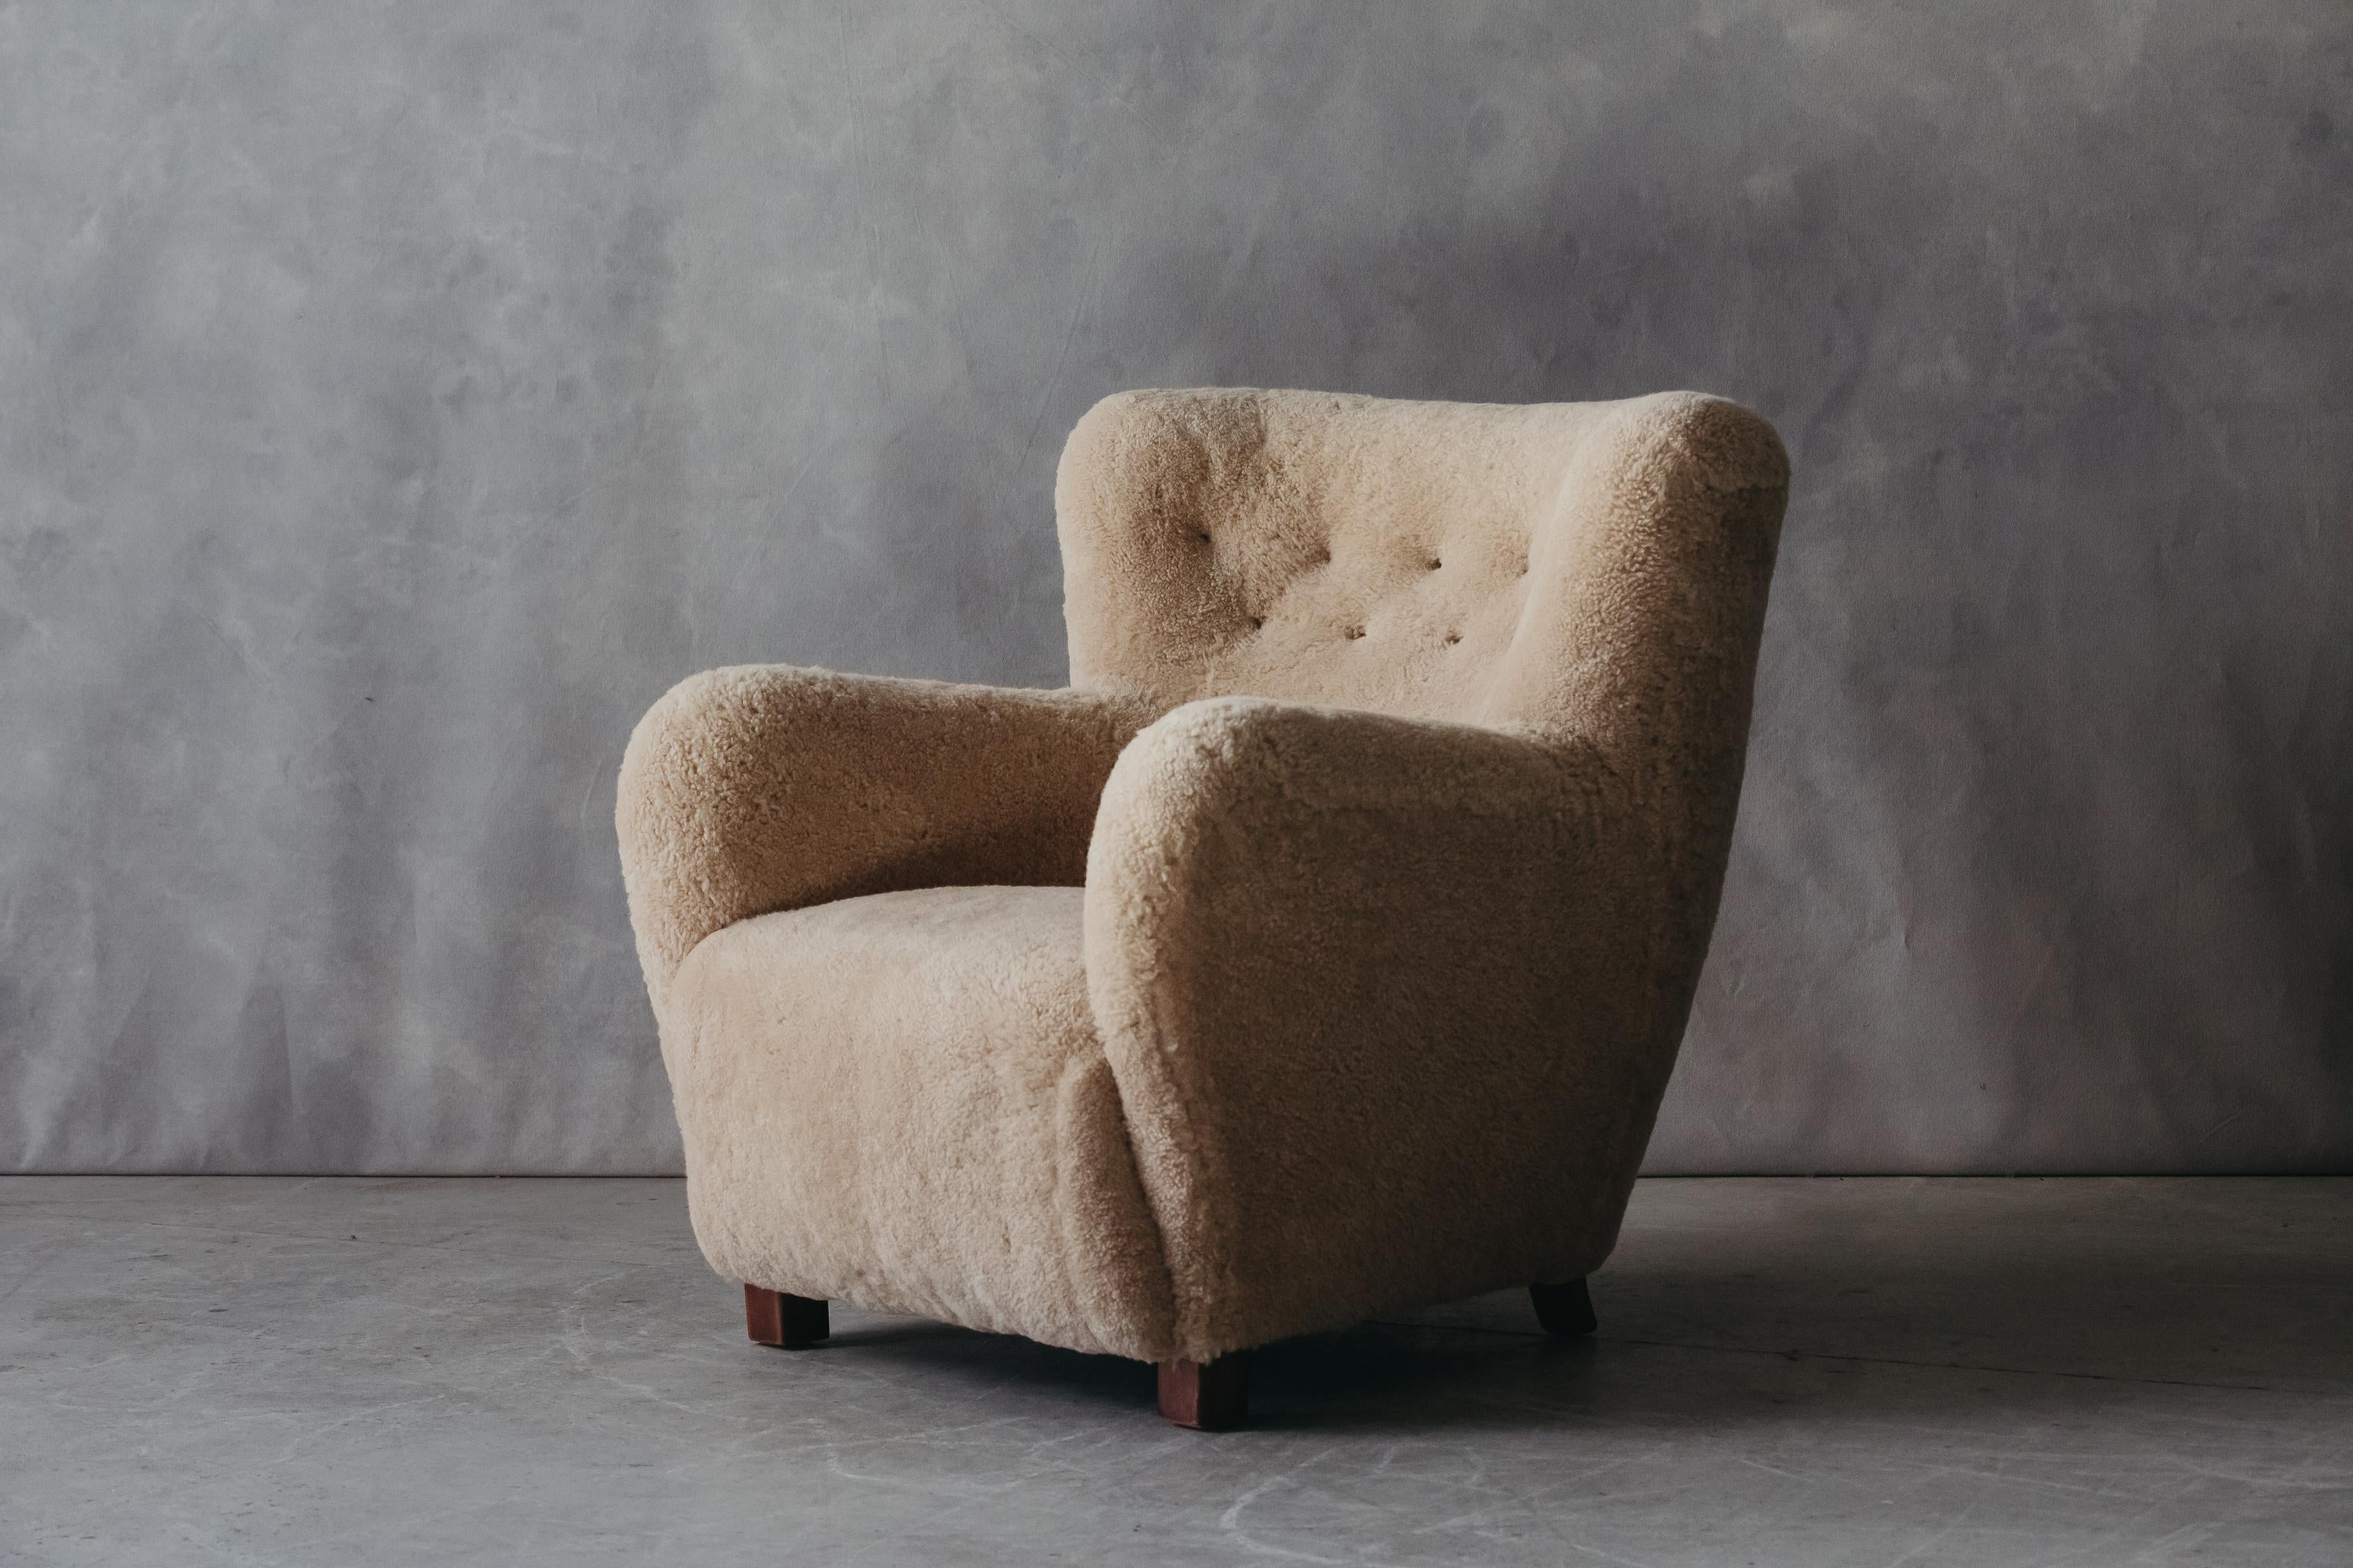 Vintage sheepskin lounge chair from denmark, circa 1960. very comfortable model, later upholstered in light tan shearling.
 
 